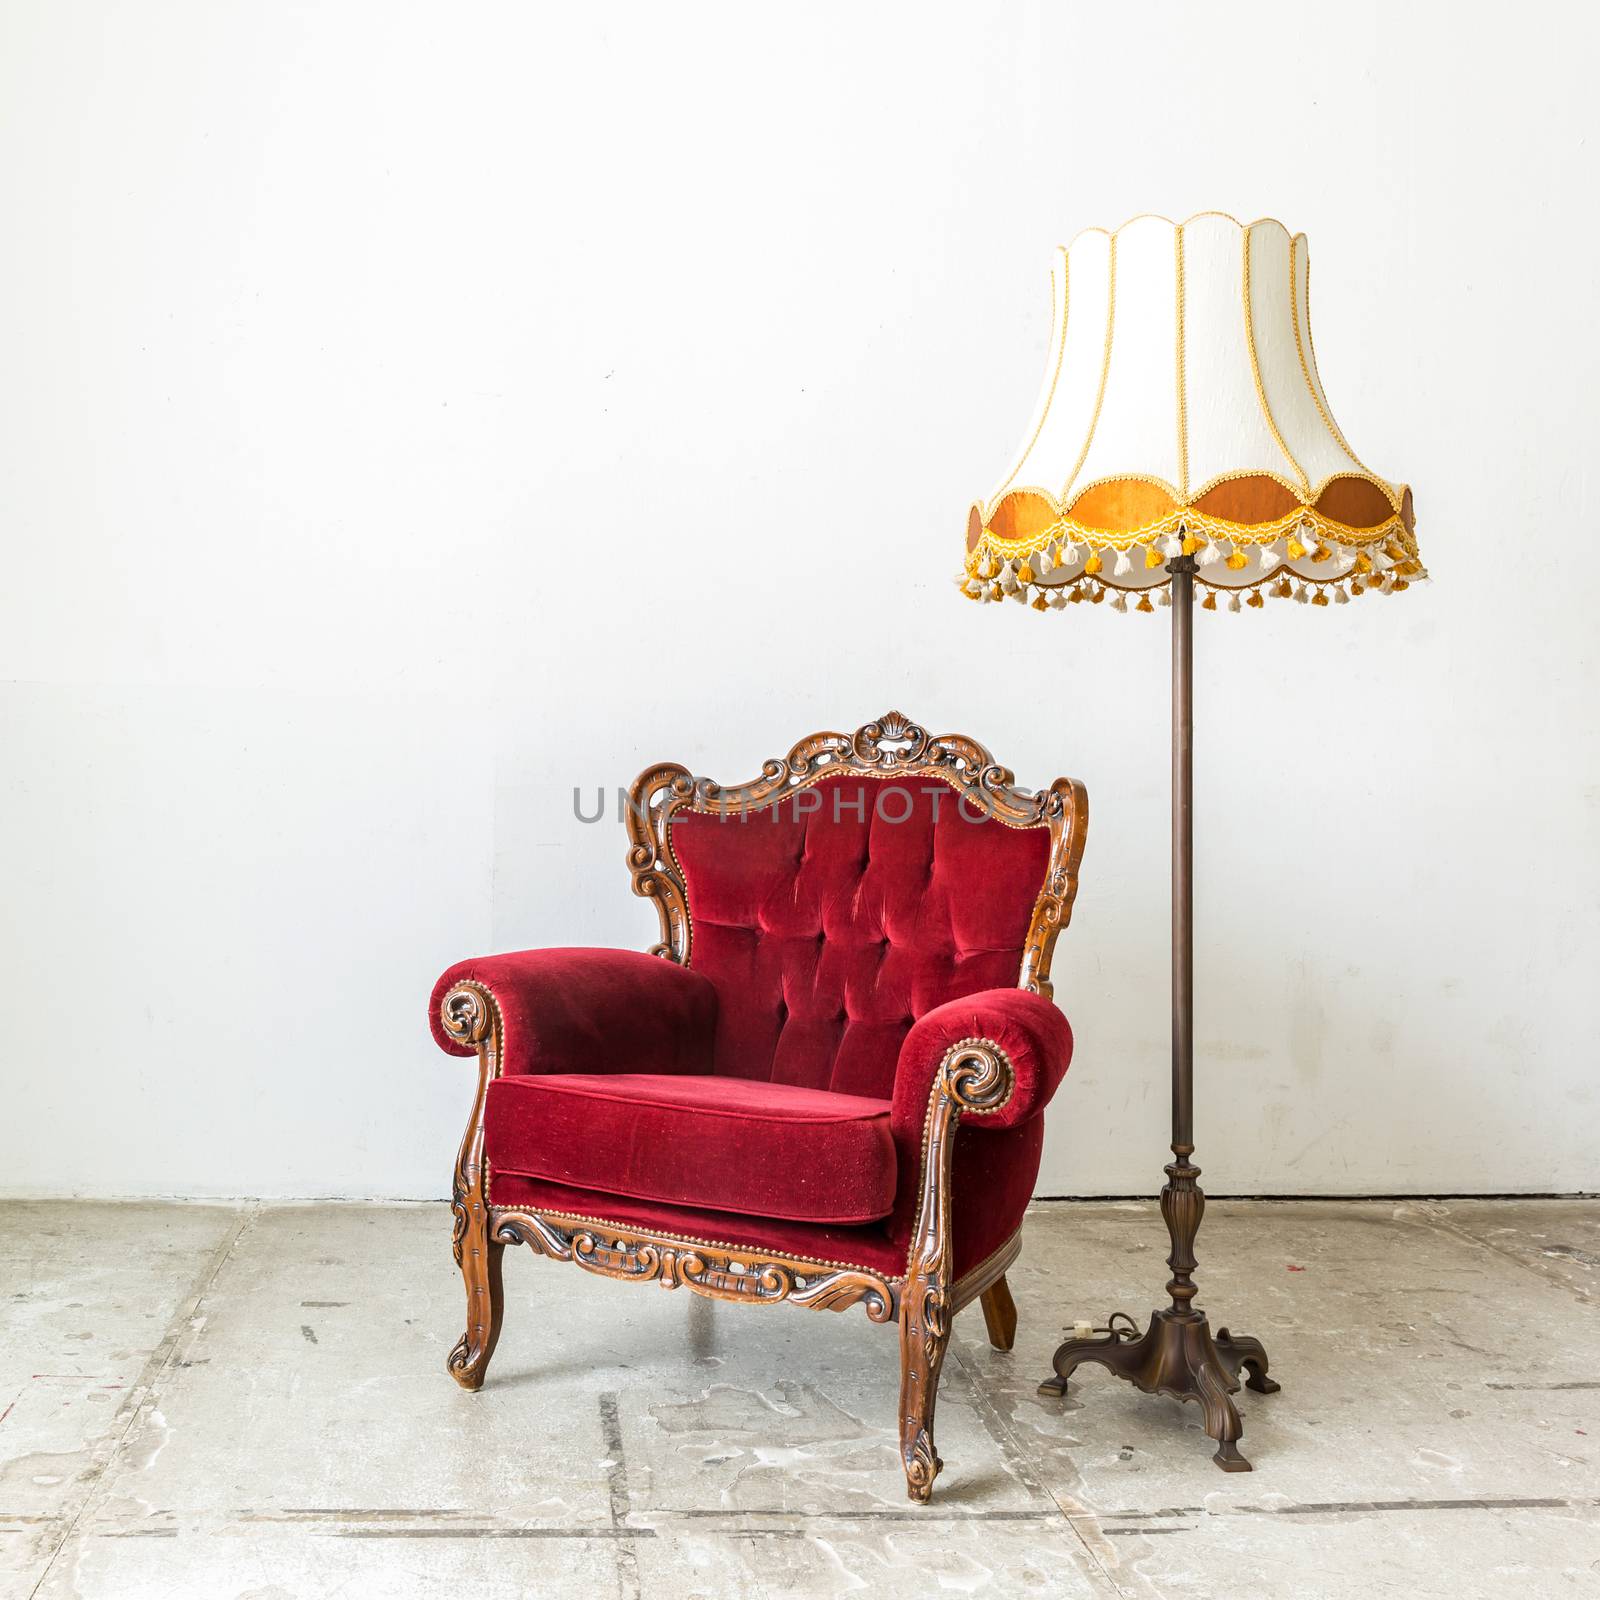 Red Vintage retro style Chair with lamp